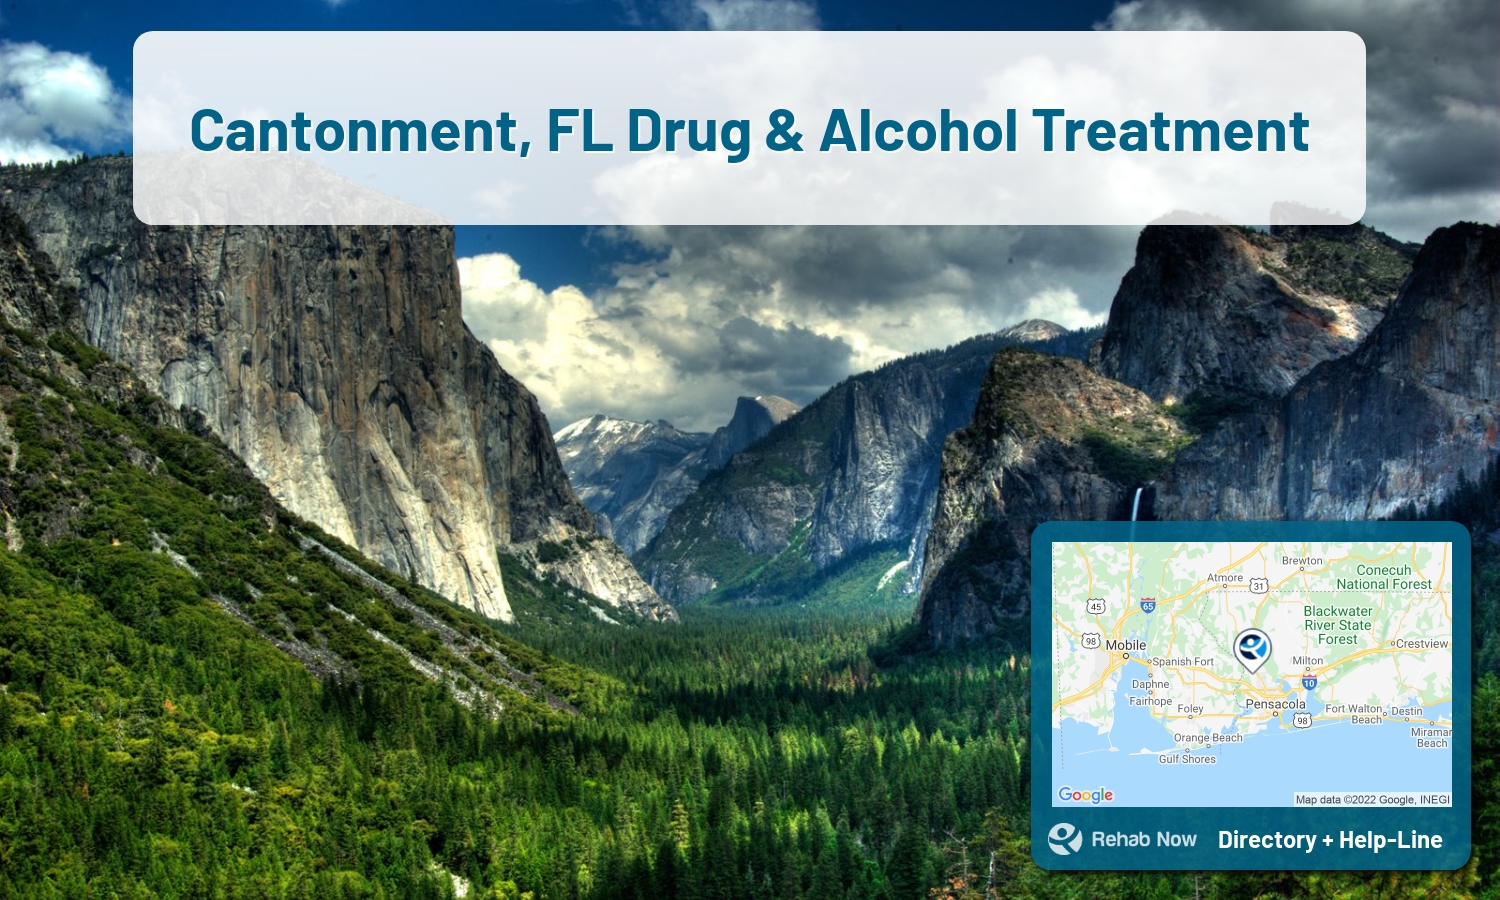 List of alcohol and drug treatment centers near you in Cantonment, Florida. Research certifications, programs, methods, pricing, and more.